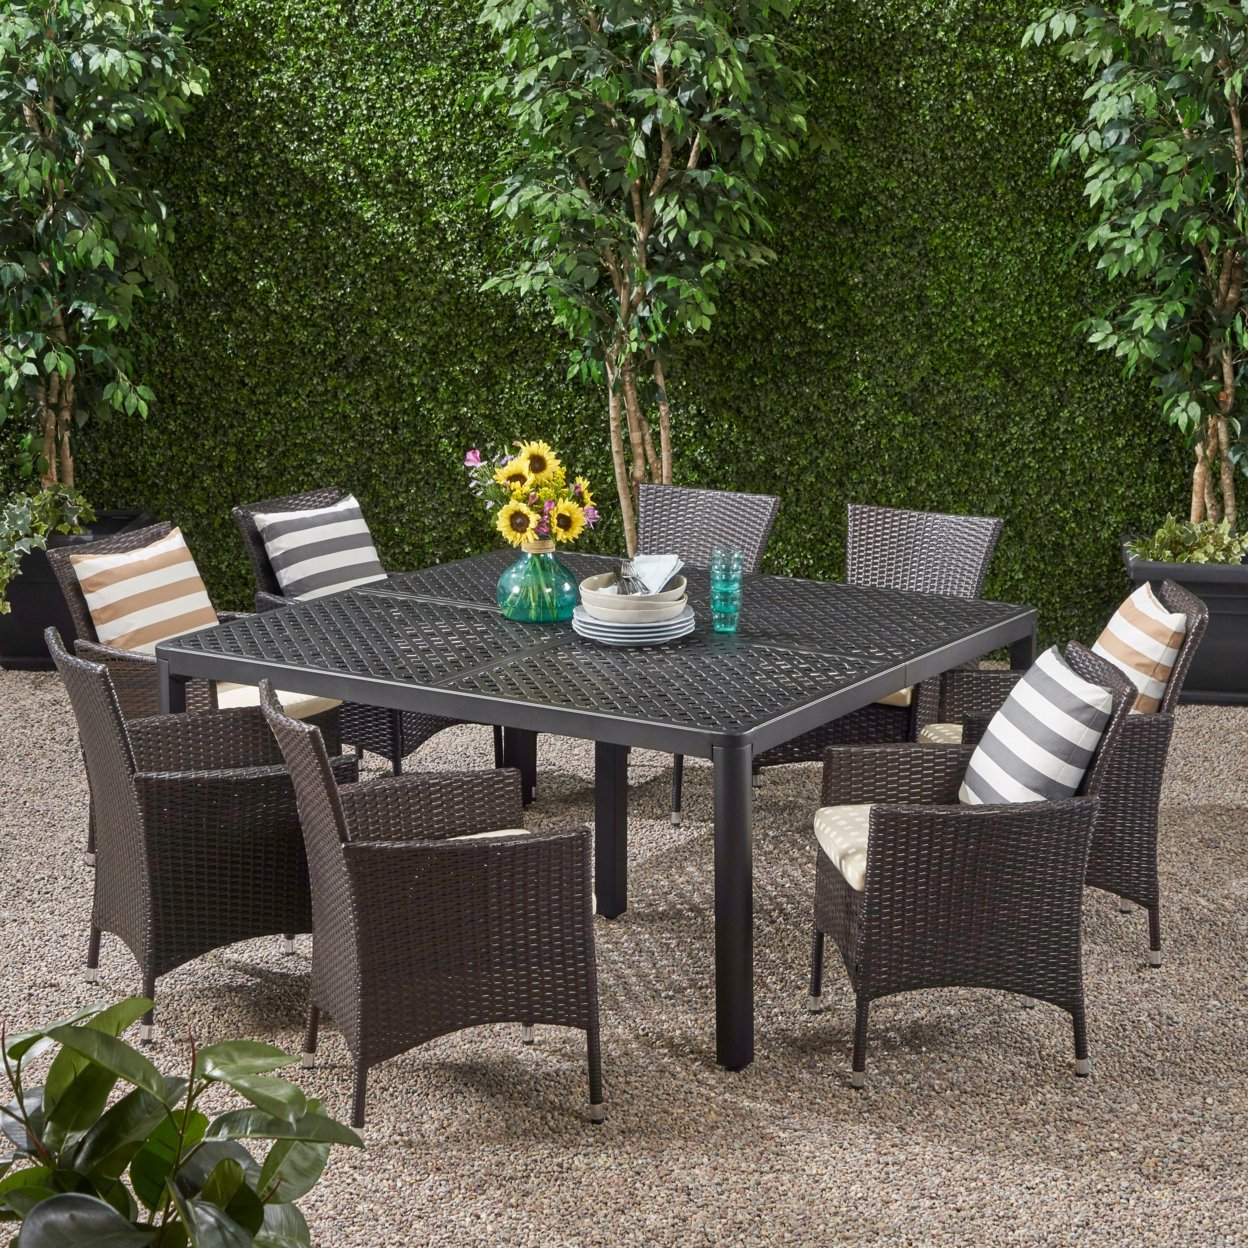 Nelly Outdoor Aluminum And Wicker 8 Seater Dining Set - Antique Matte Black + Multibrown + Beige